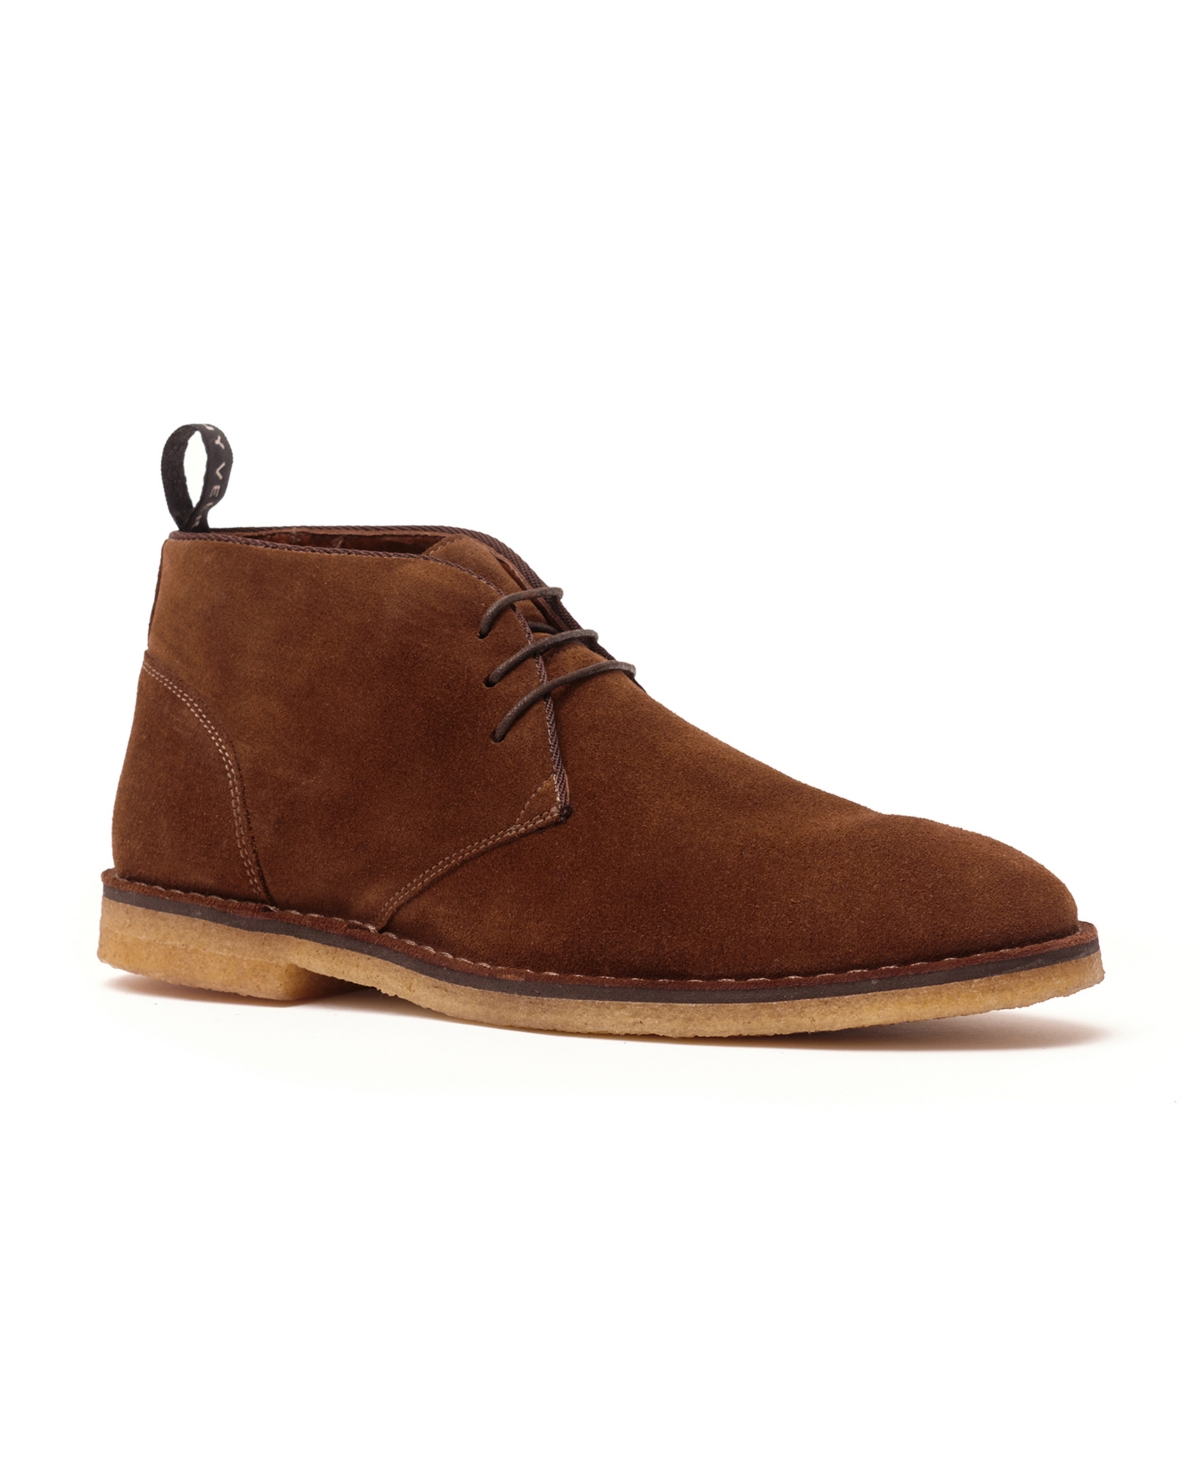 Anthony Veer Men's George Suede Lace-Up Chukka Boots Men's Shoes